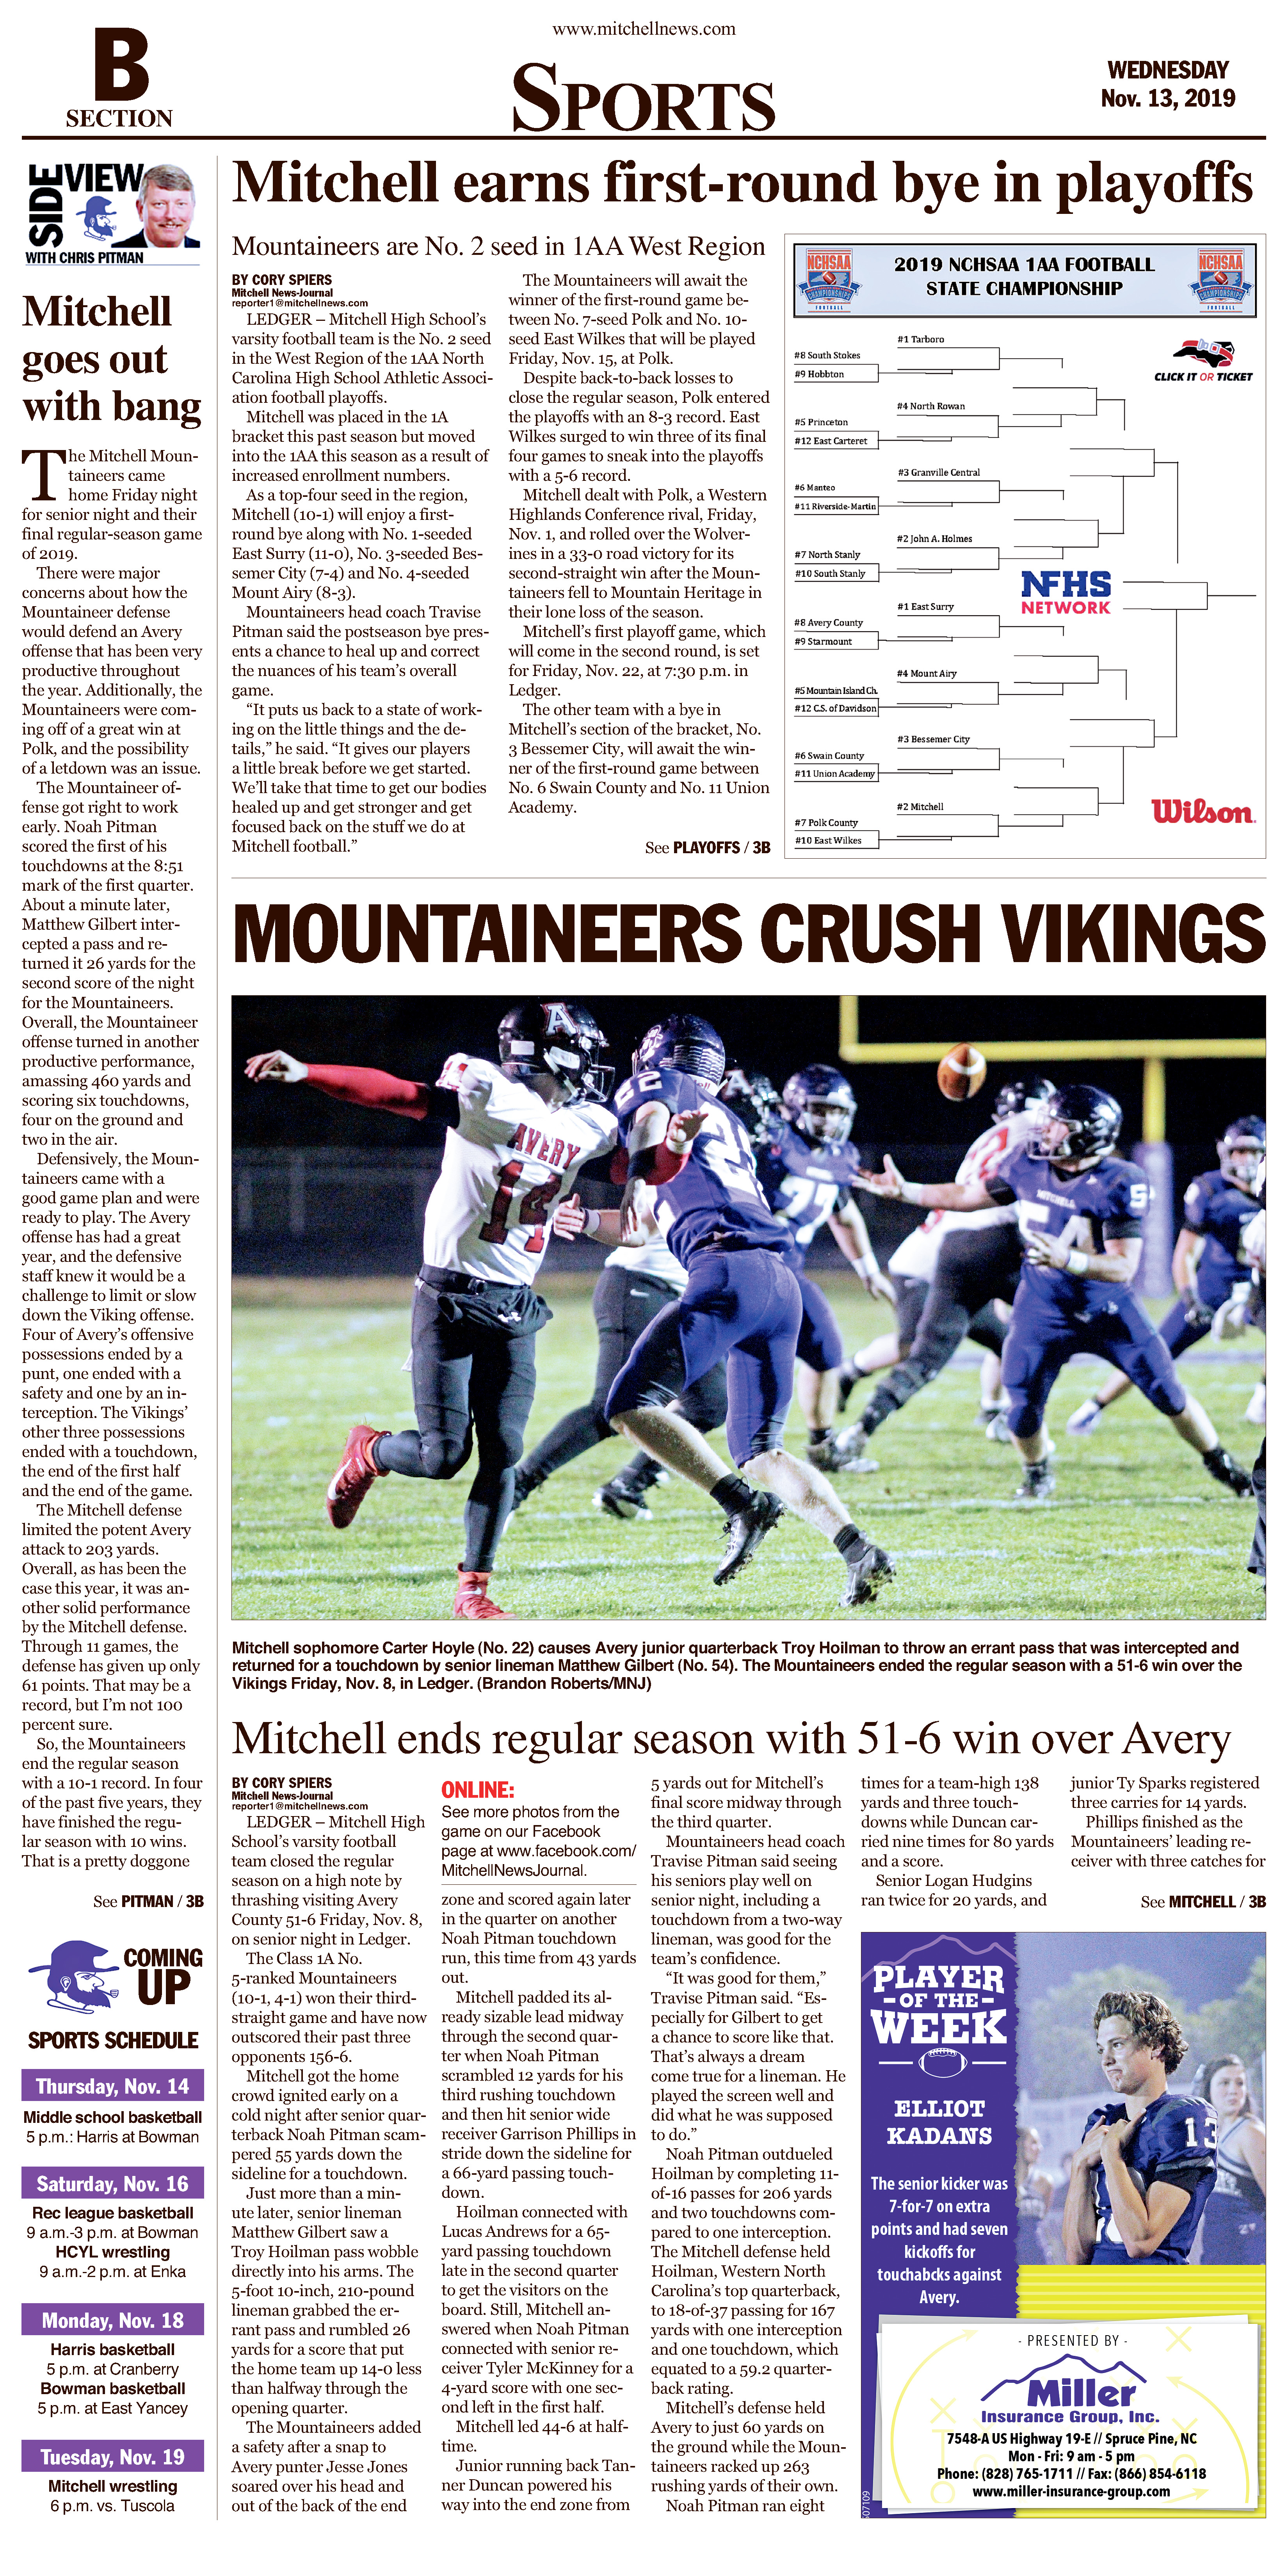 Sports page for Wednesday, Nov. 13.